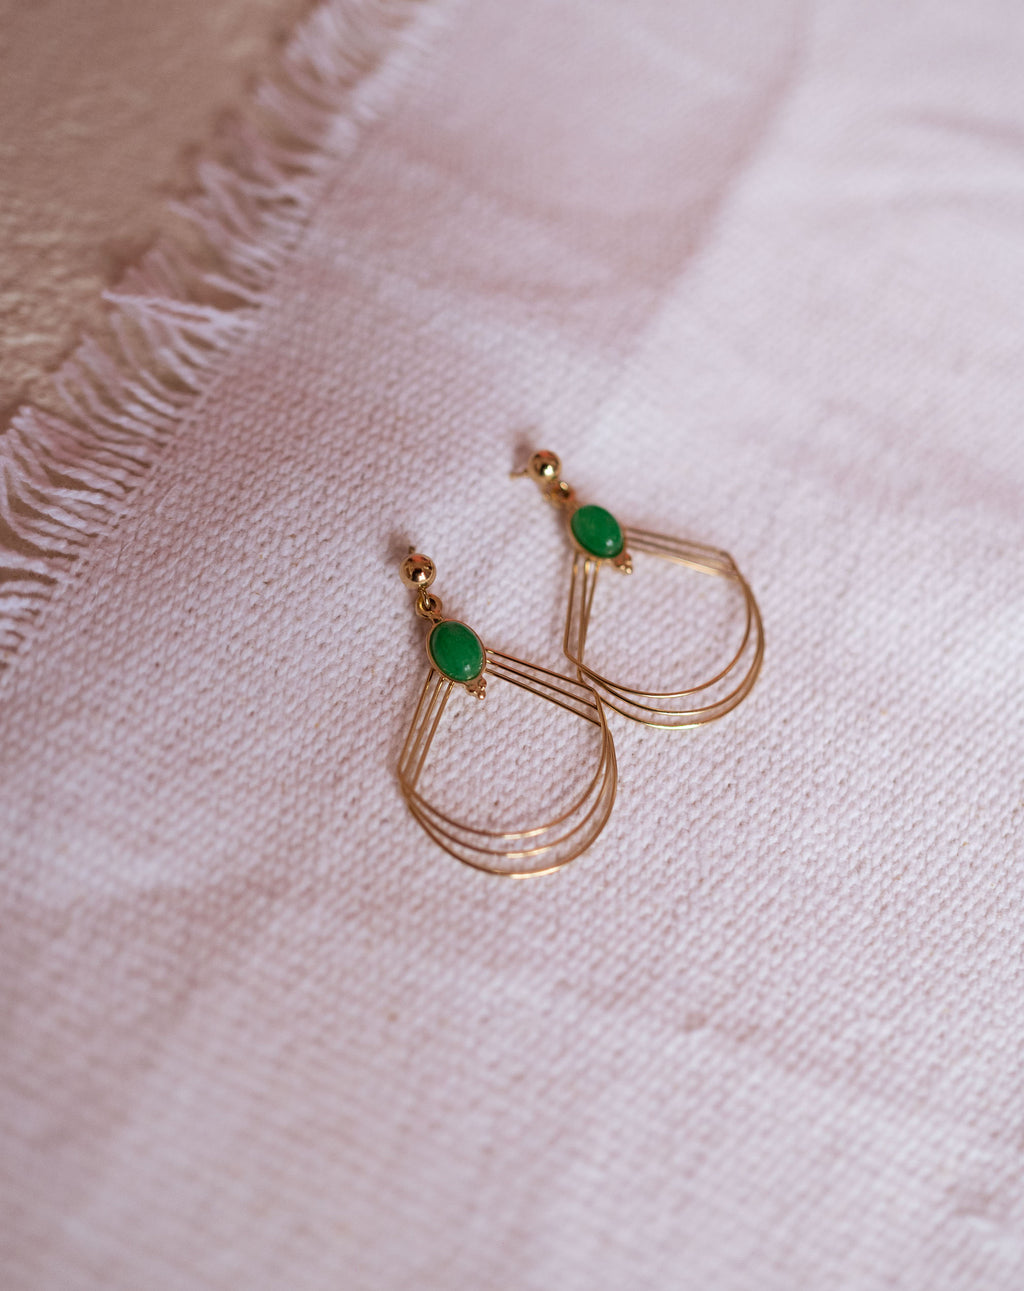 Adil earrings - Golden and green